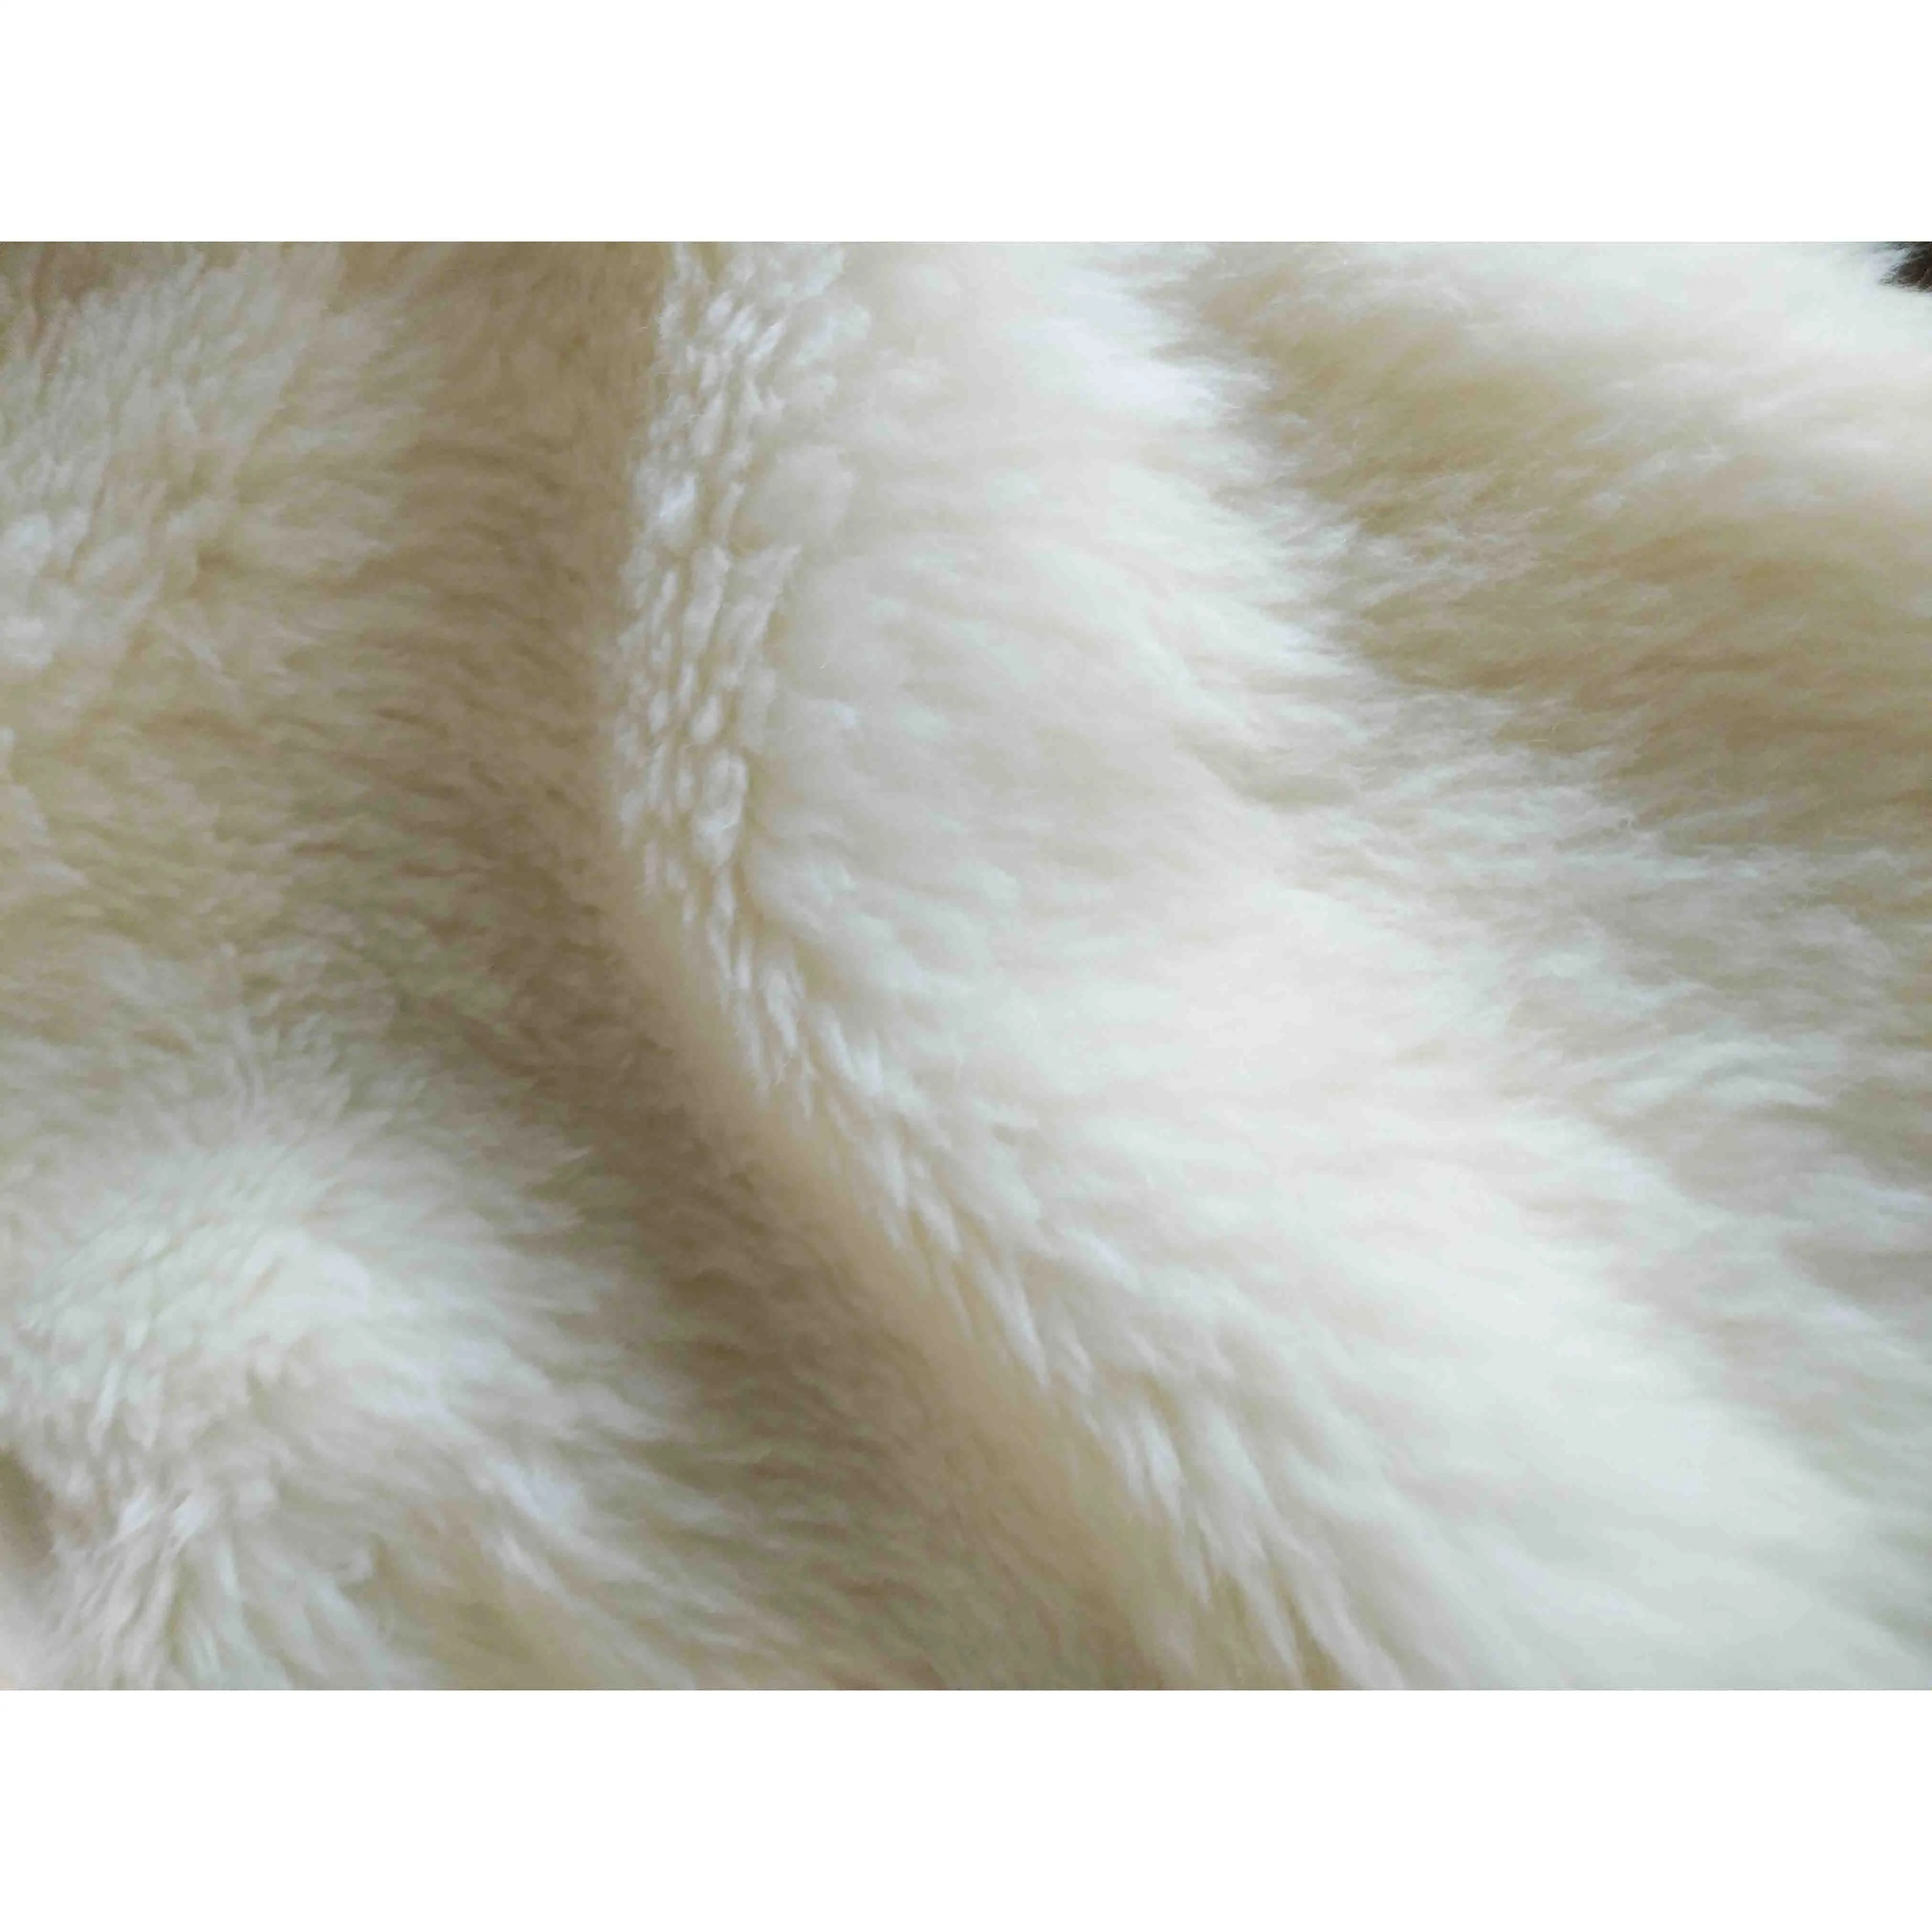 Australian Wool Fabric Fur For Making Blankets And Rugs